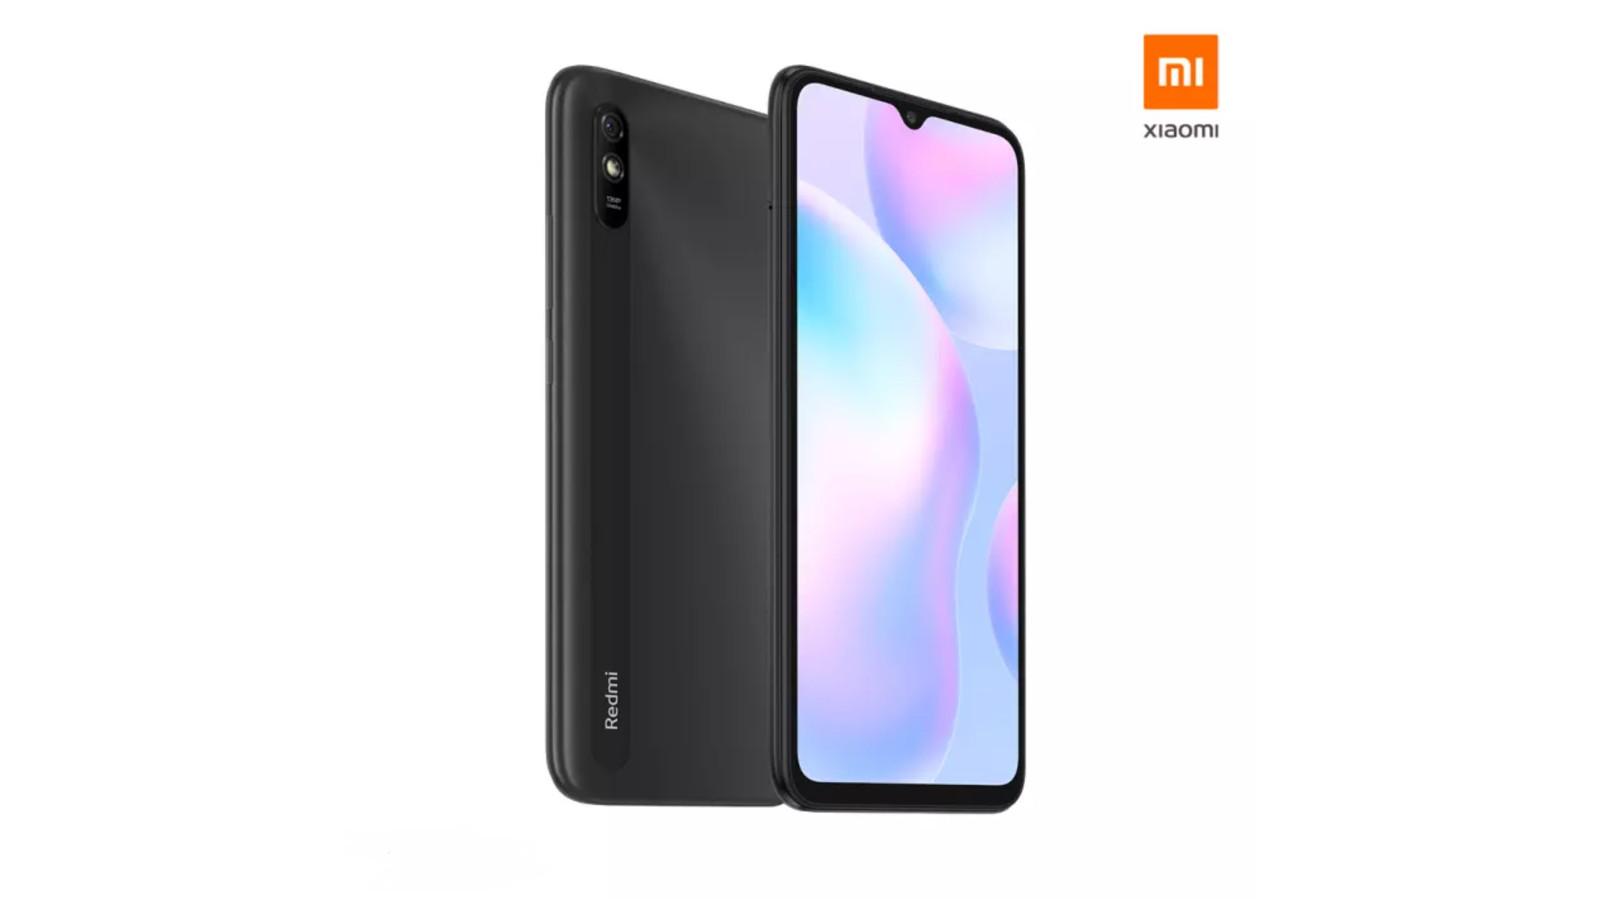 Xiaomi Redmi 9a Launches In India For Under